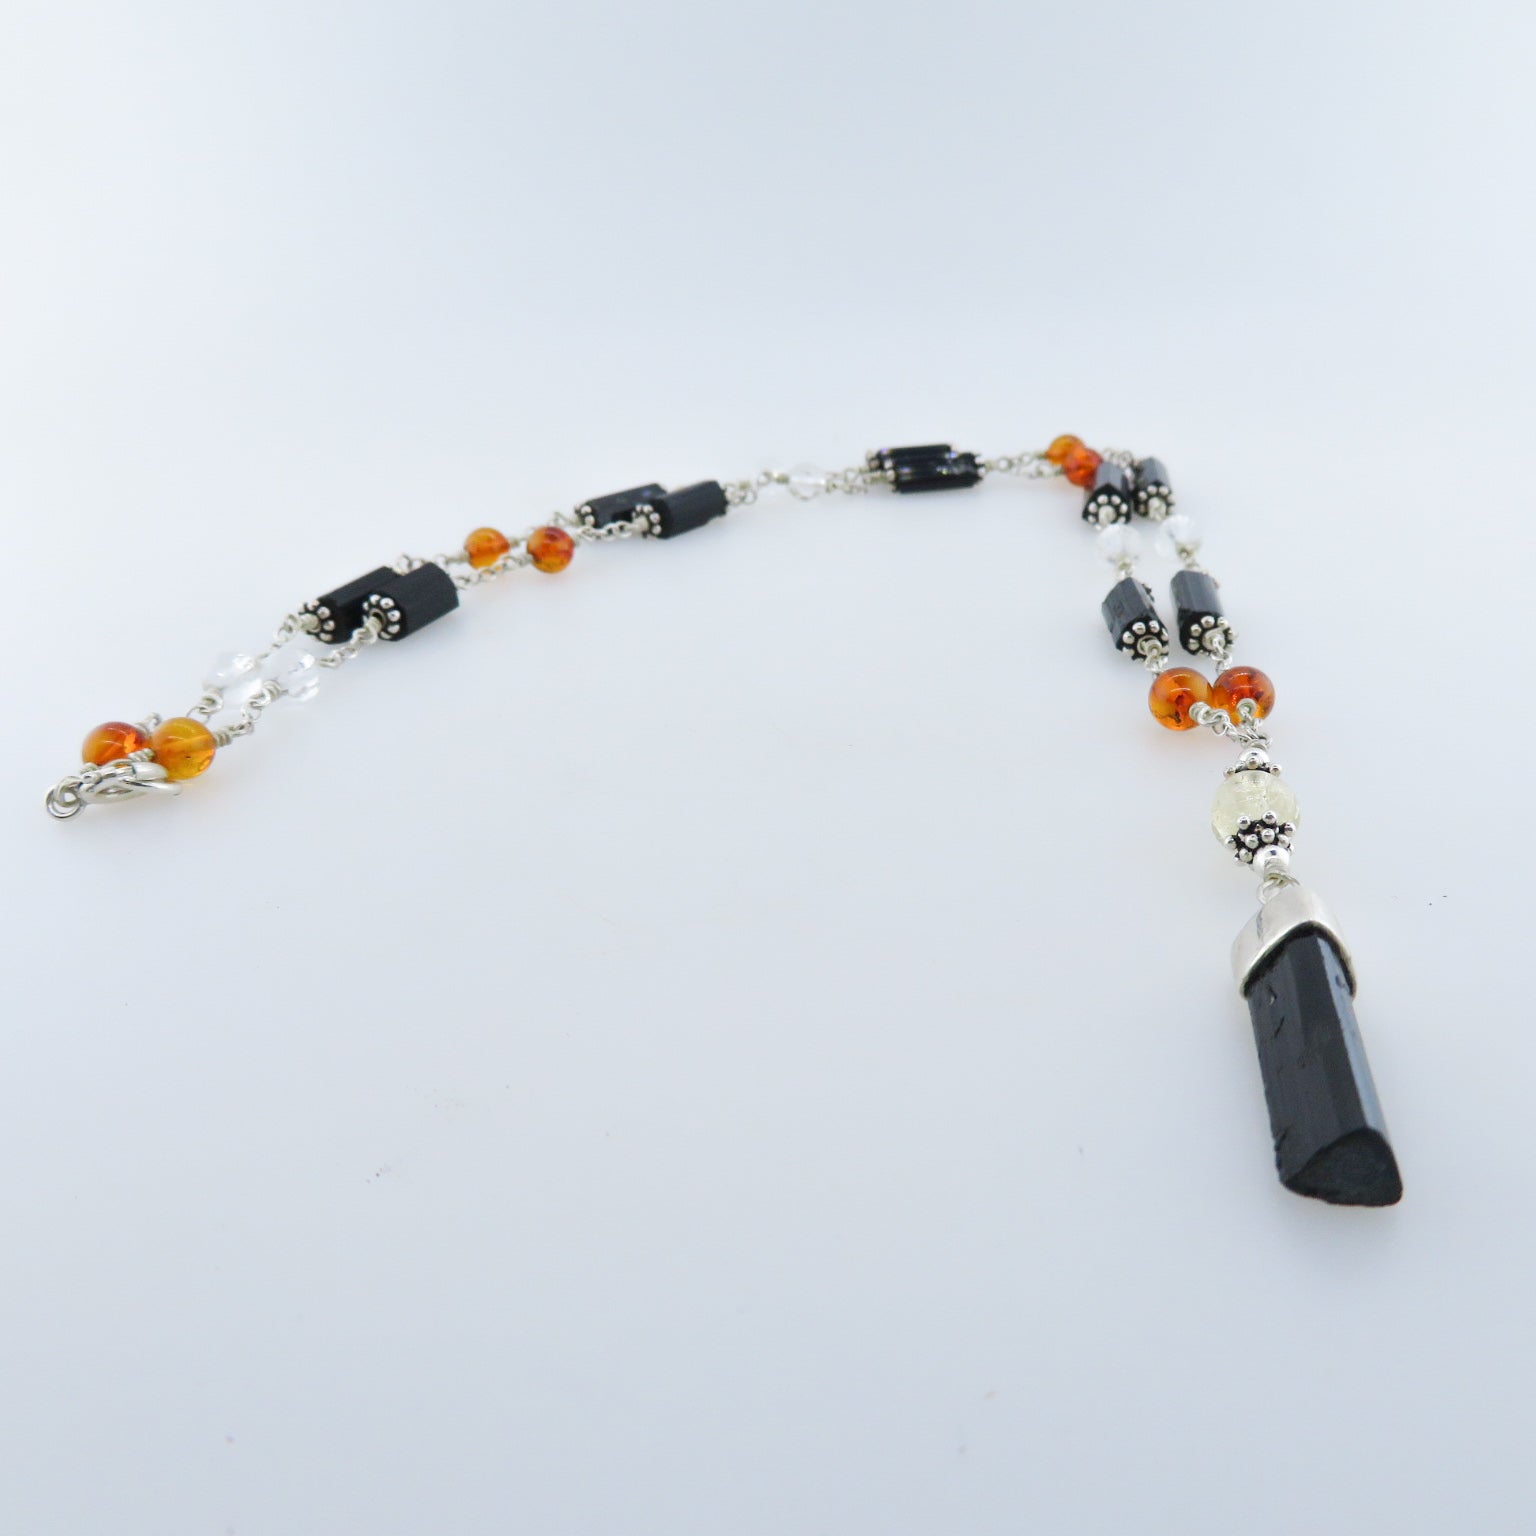 Black Tourmaline Necklace with Amber, Crystal, Citrine and Sterling Silver